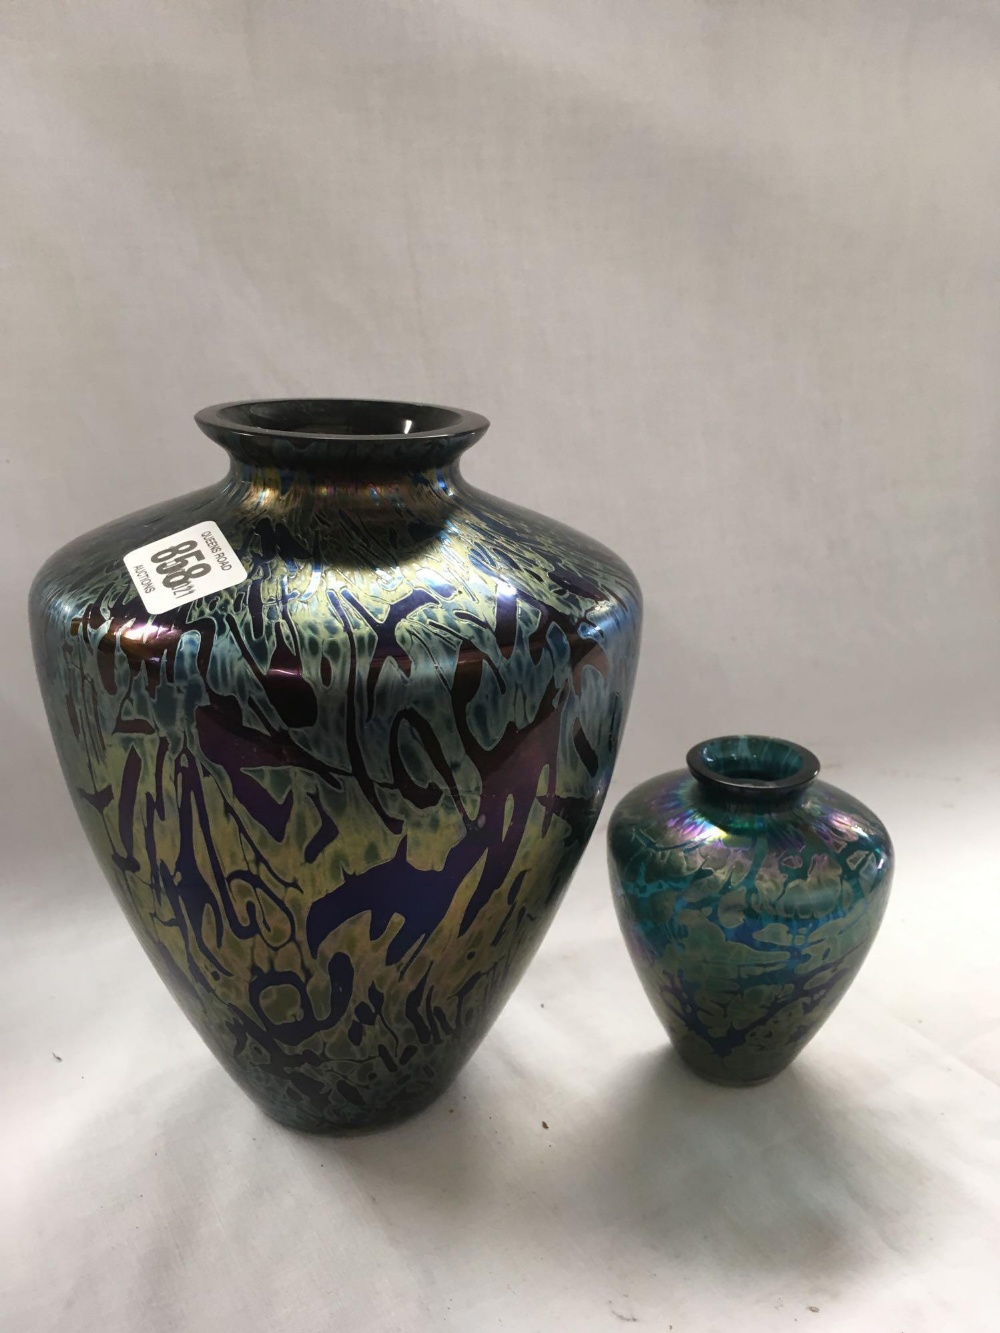 1 LARGE & 1 SMALL ROYAL BRIERLEY ART GLASS VASES - Image 3 of 3